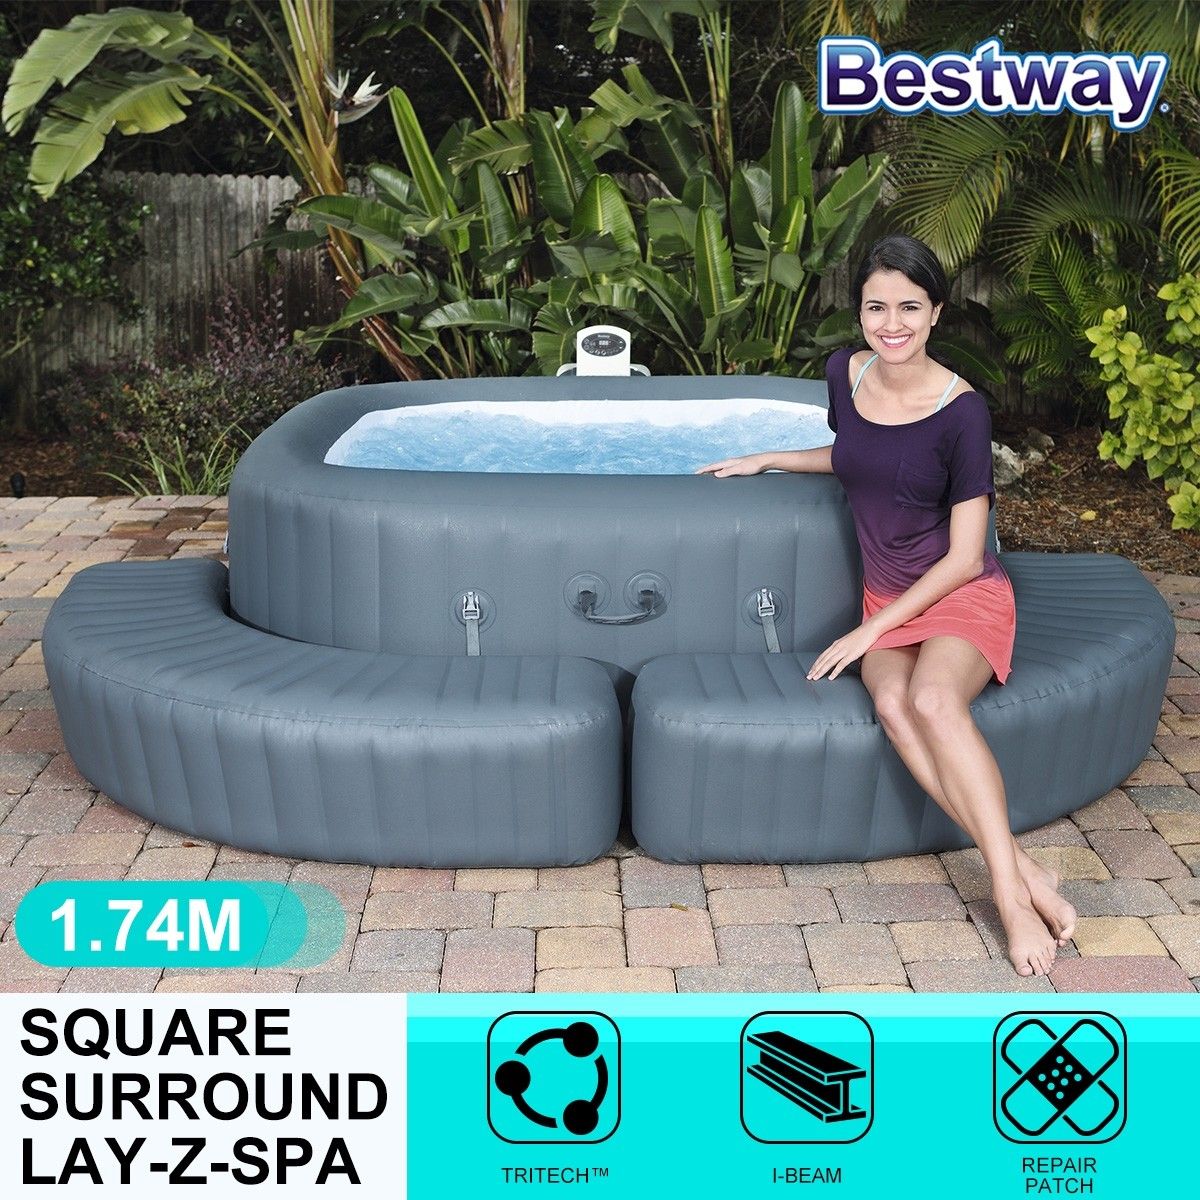 Lay Z Spa Pool Surrounds Air Sofa Hot Tub Square Surrounds 1.74m X 40cm ...